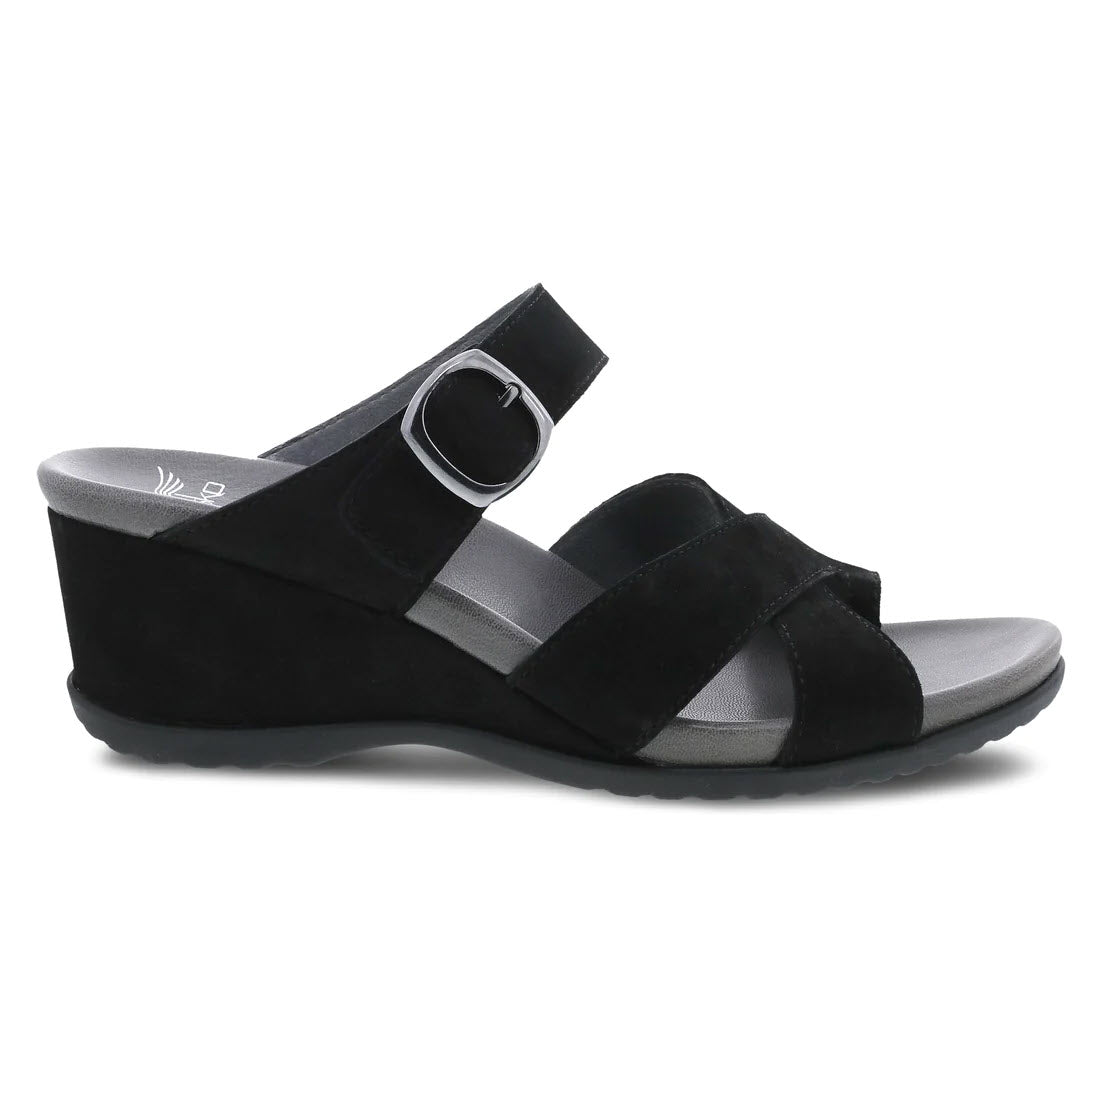 Dansko Aubree black nubuck wedge sandal with two uppers straps and a circular buckle on a white background.